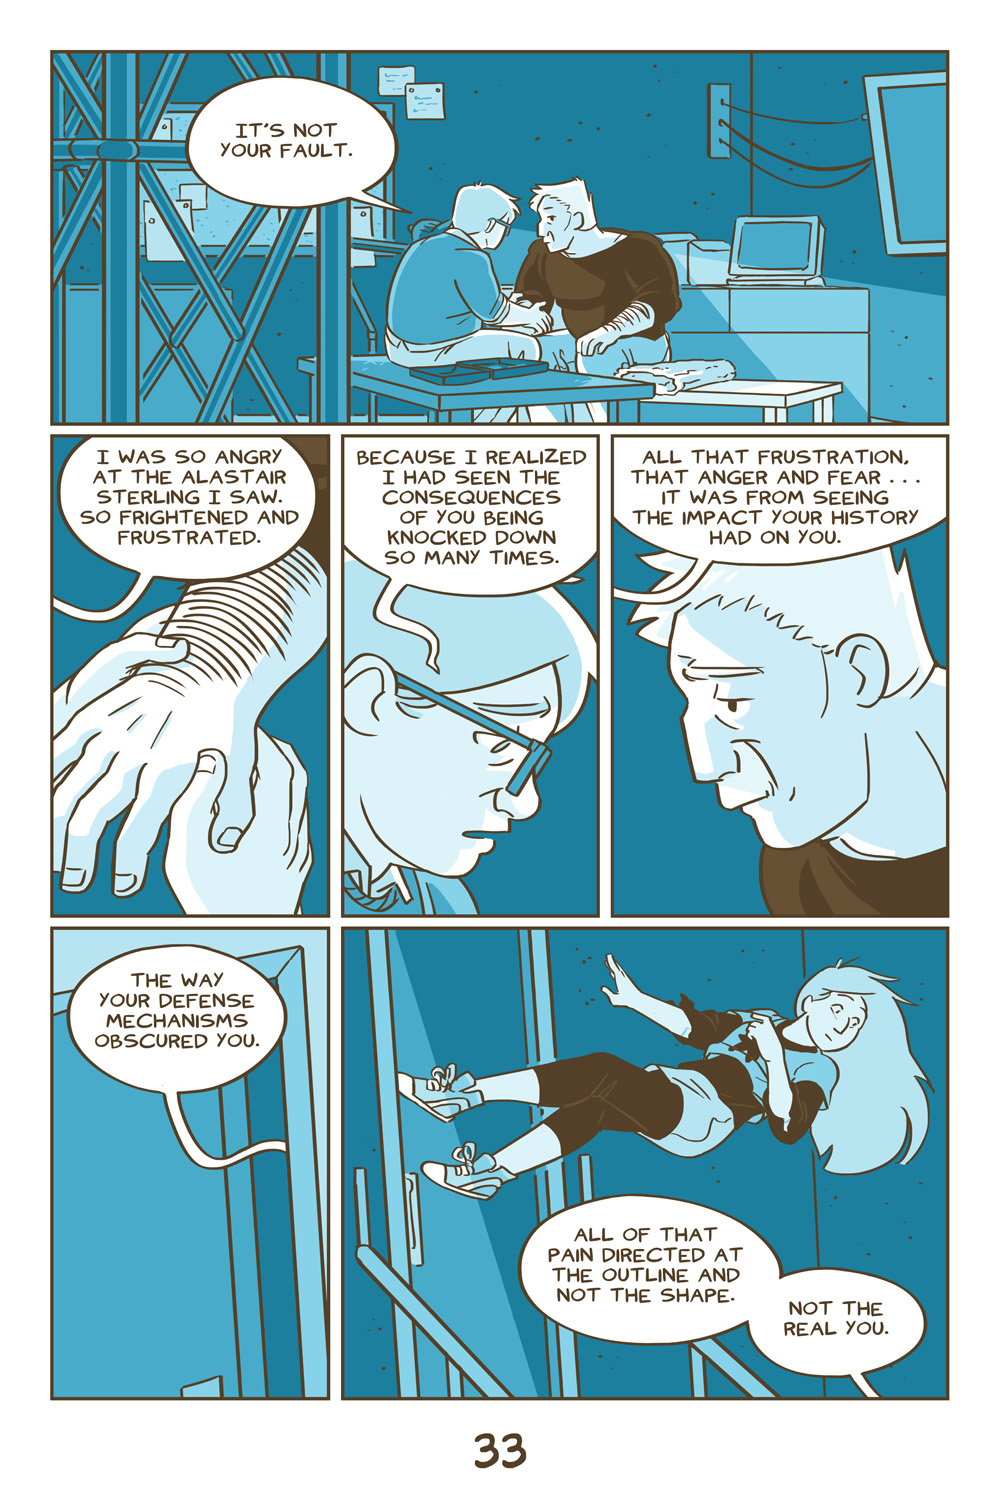 Chapter 7, Page 33